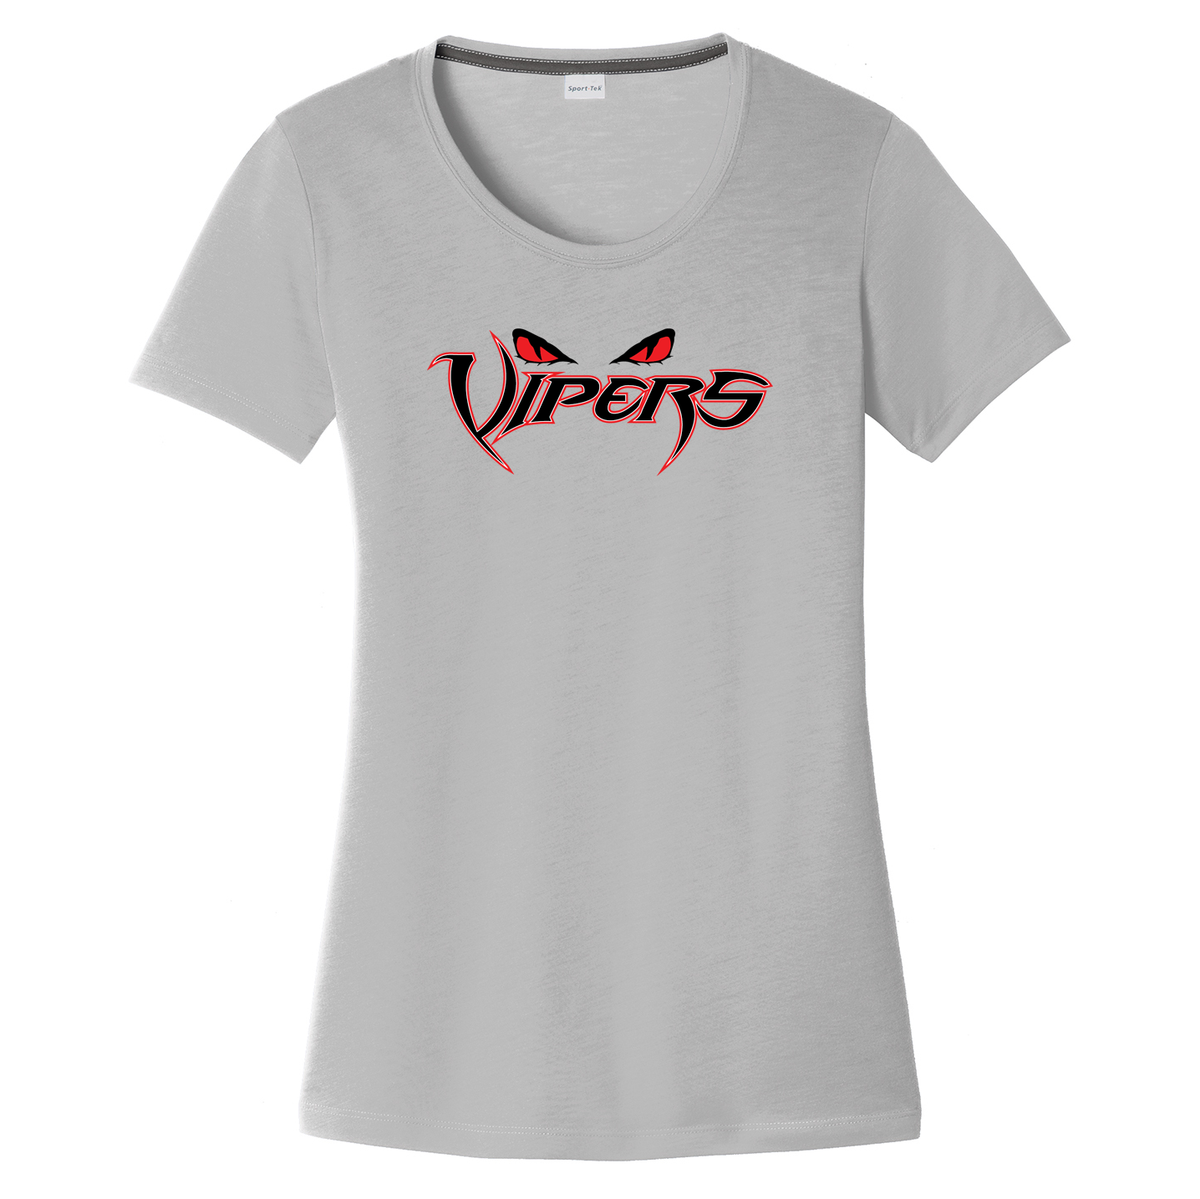 Vipers Women's CottonTouch Performance T-Shirt